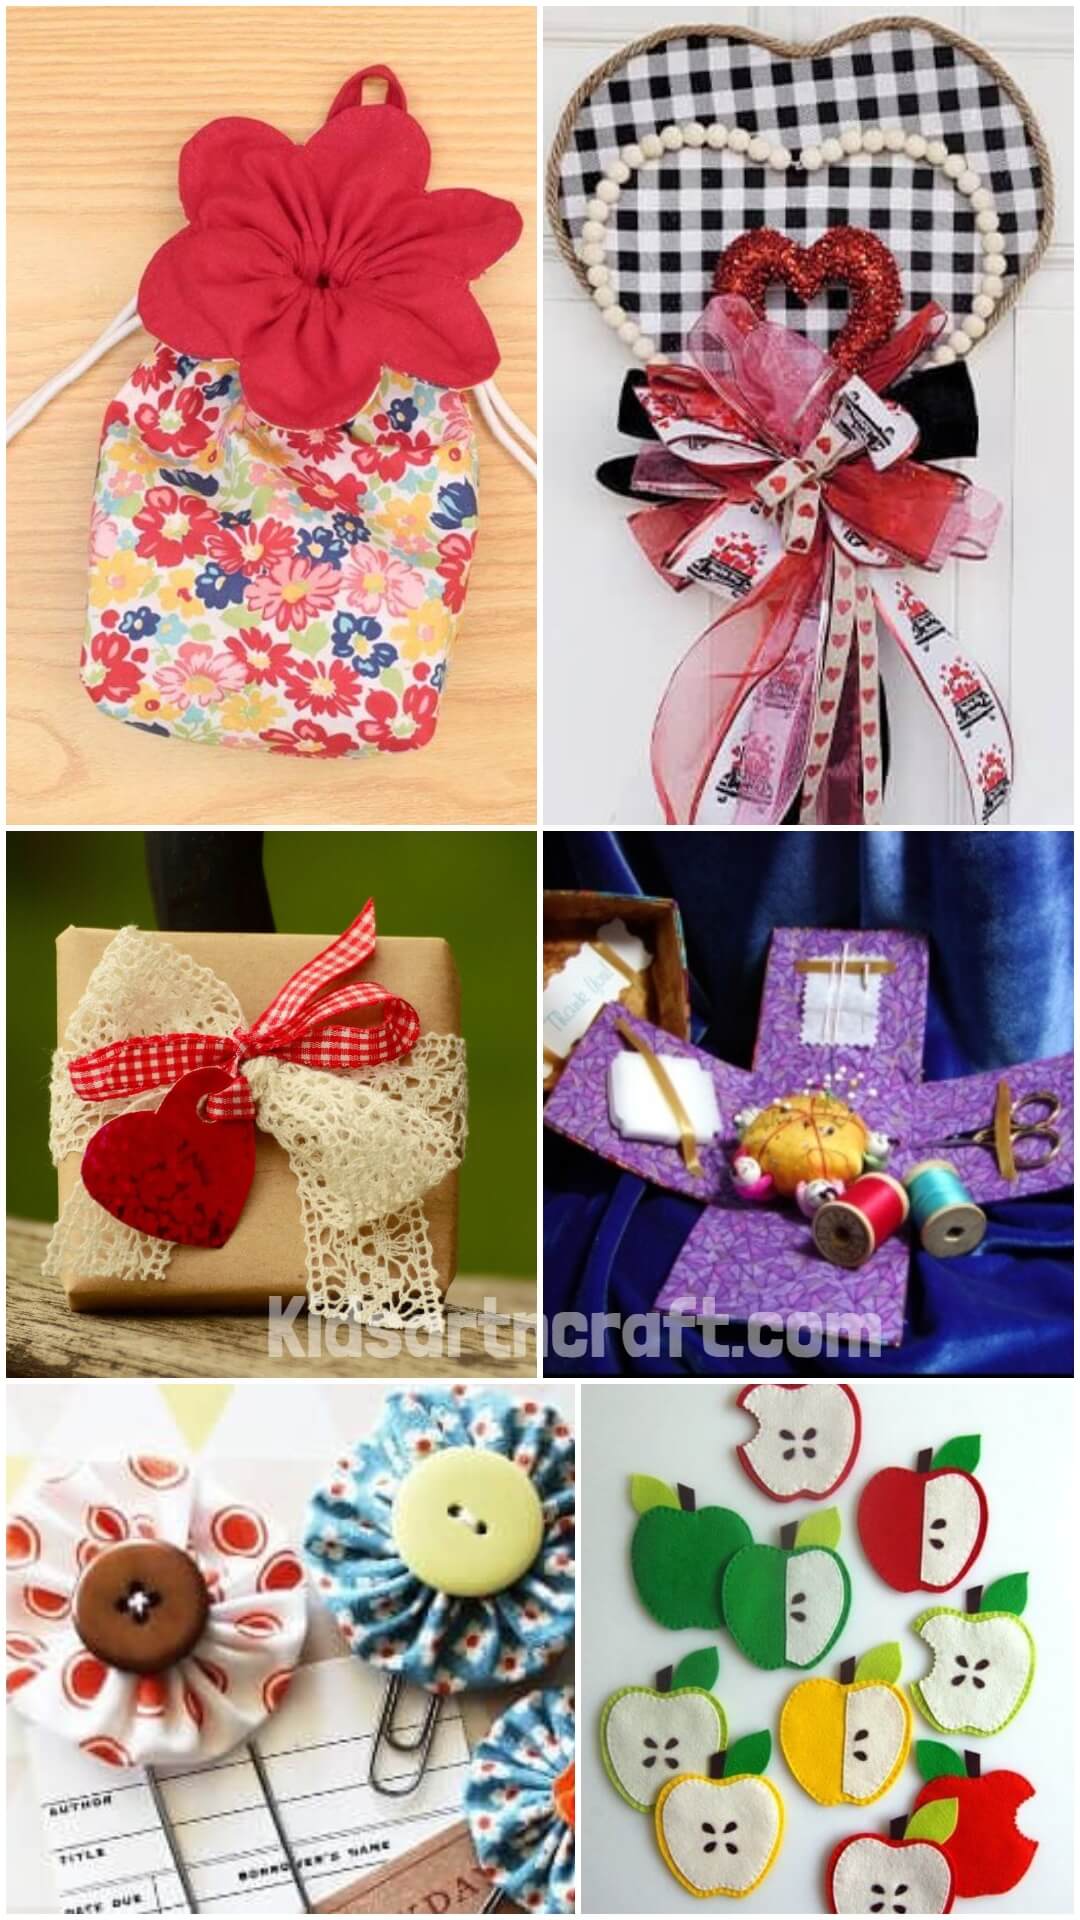 Fabric Crafts to Gift